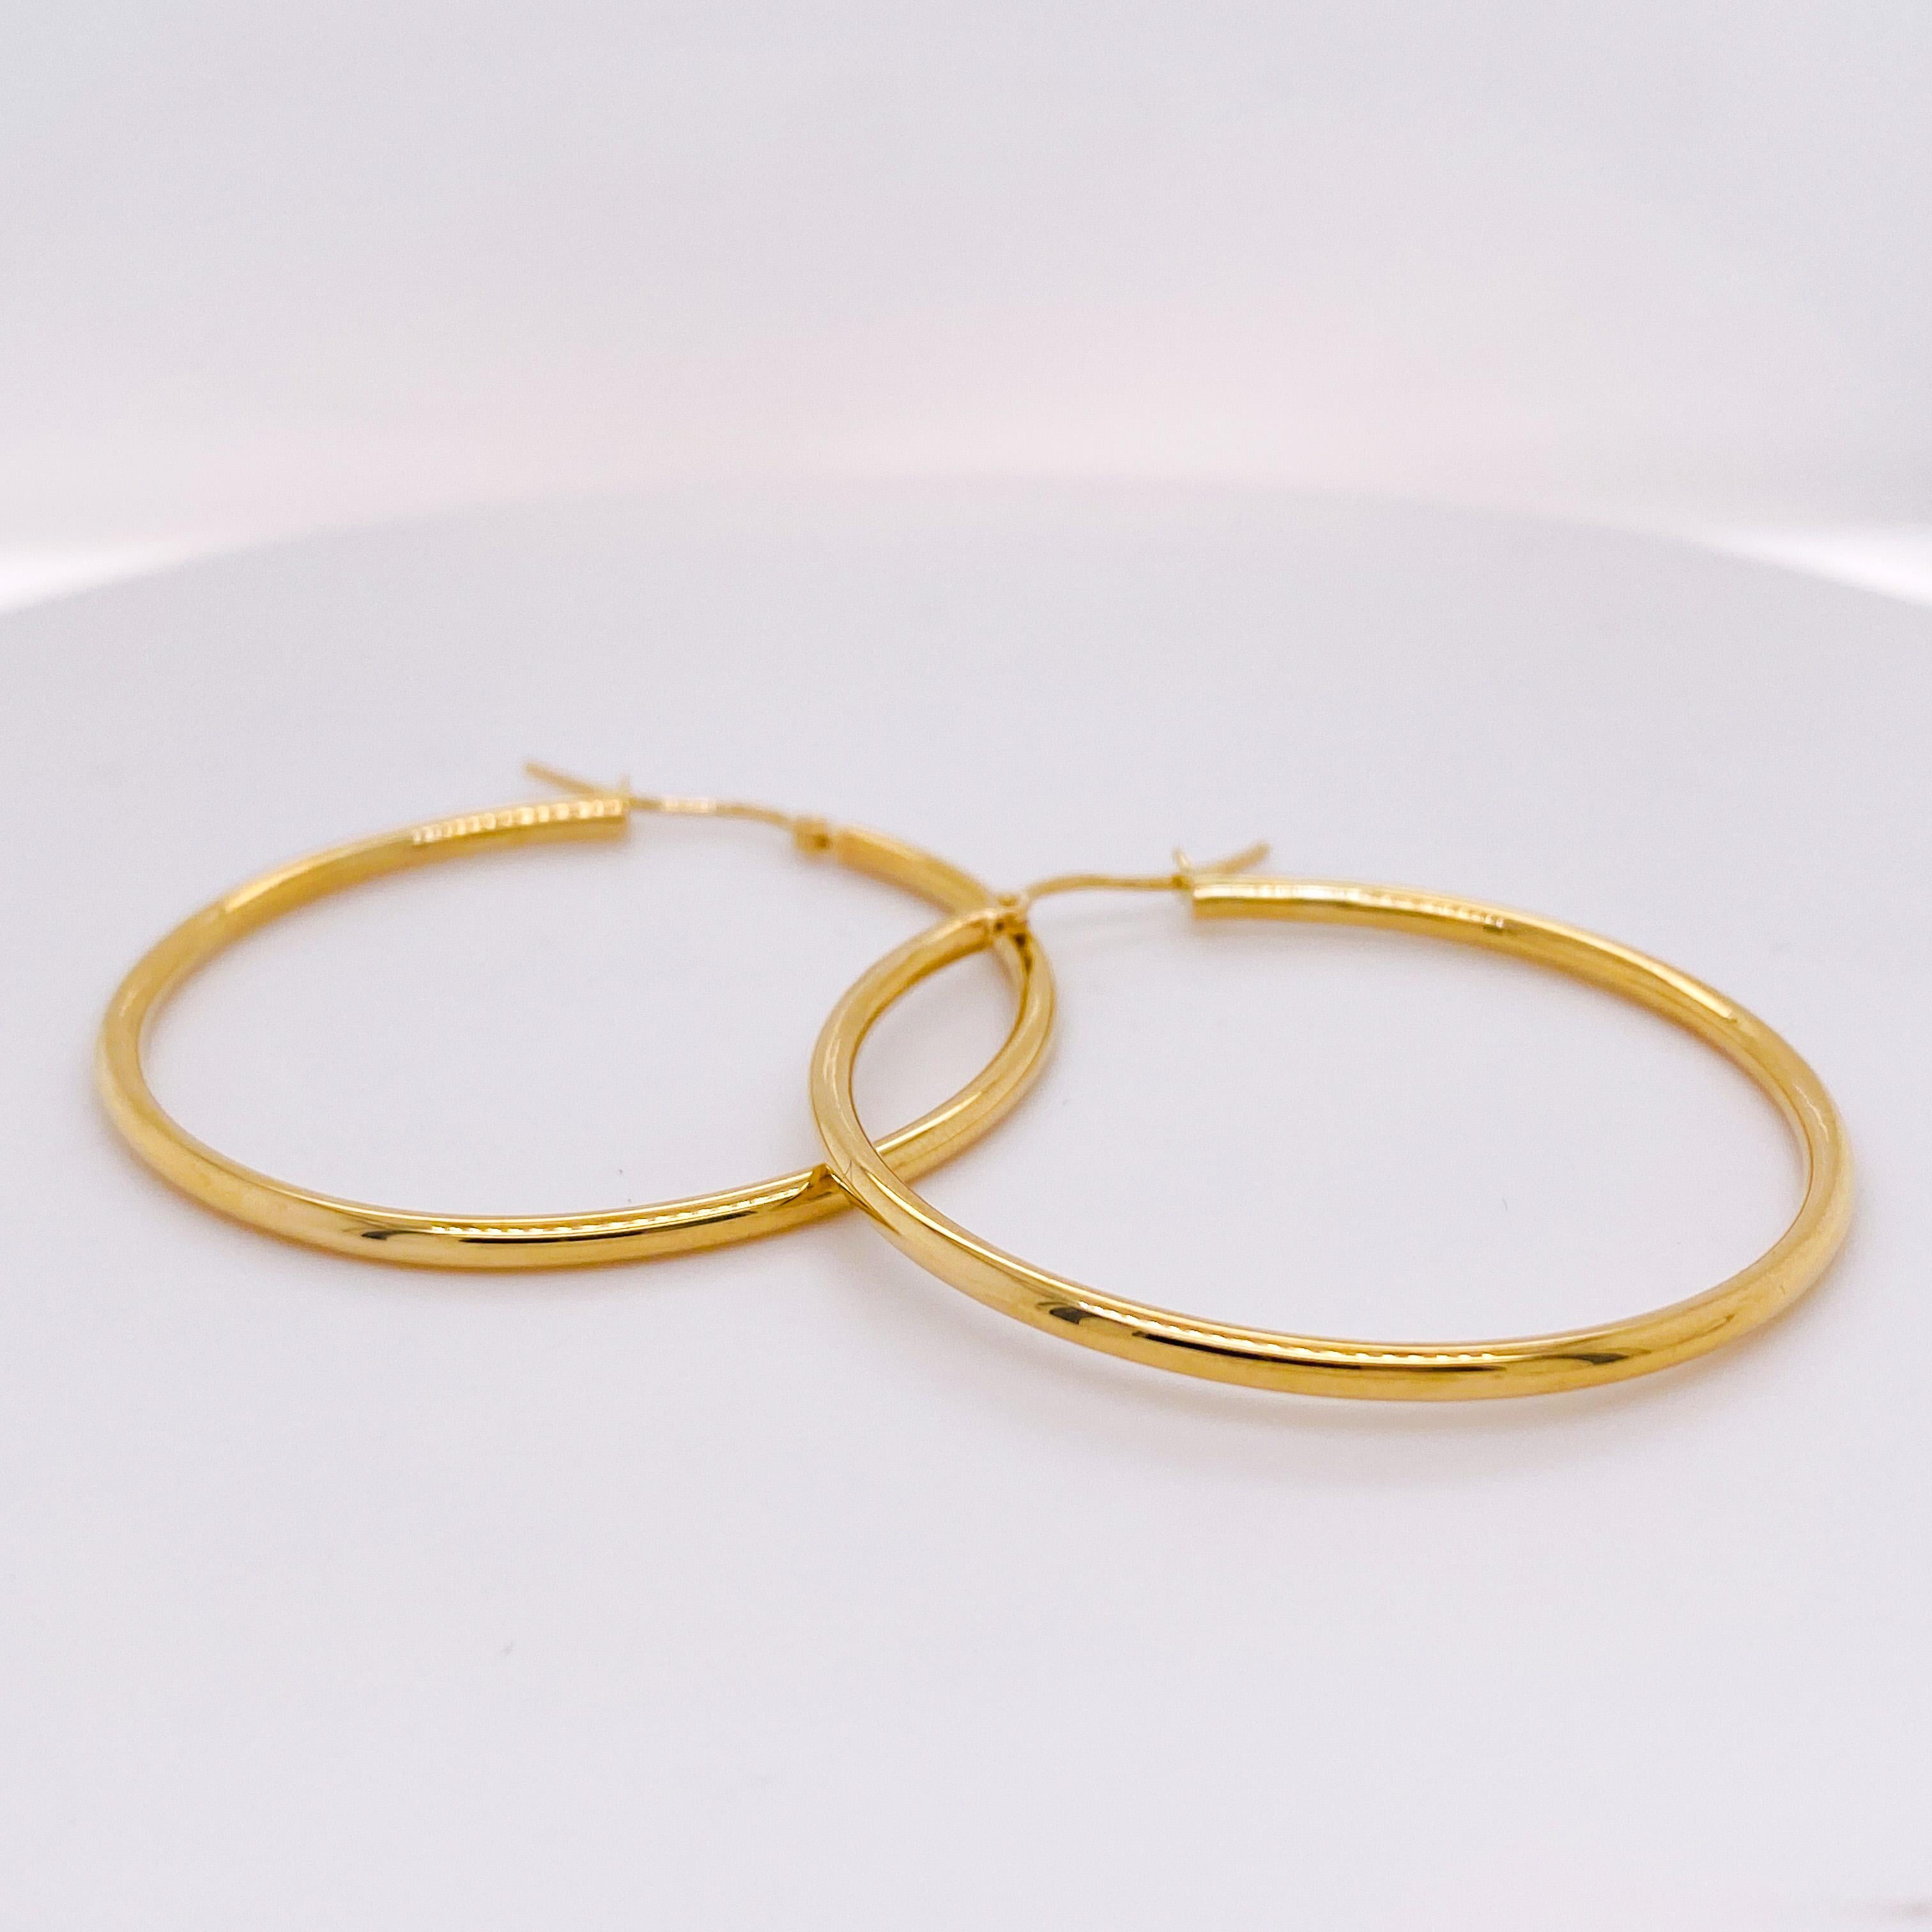 This 1.5 inch gold hoop is the latest fabulous hoop earring you need! These 2.5 mm wide hoop earrings are lightweight and easy to wear so it does not pull on your earlobes... And they're perfect for any hair length! Yellow gold color is what all the